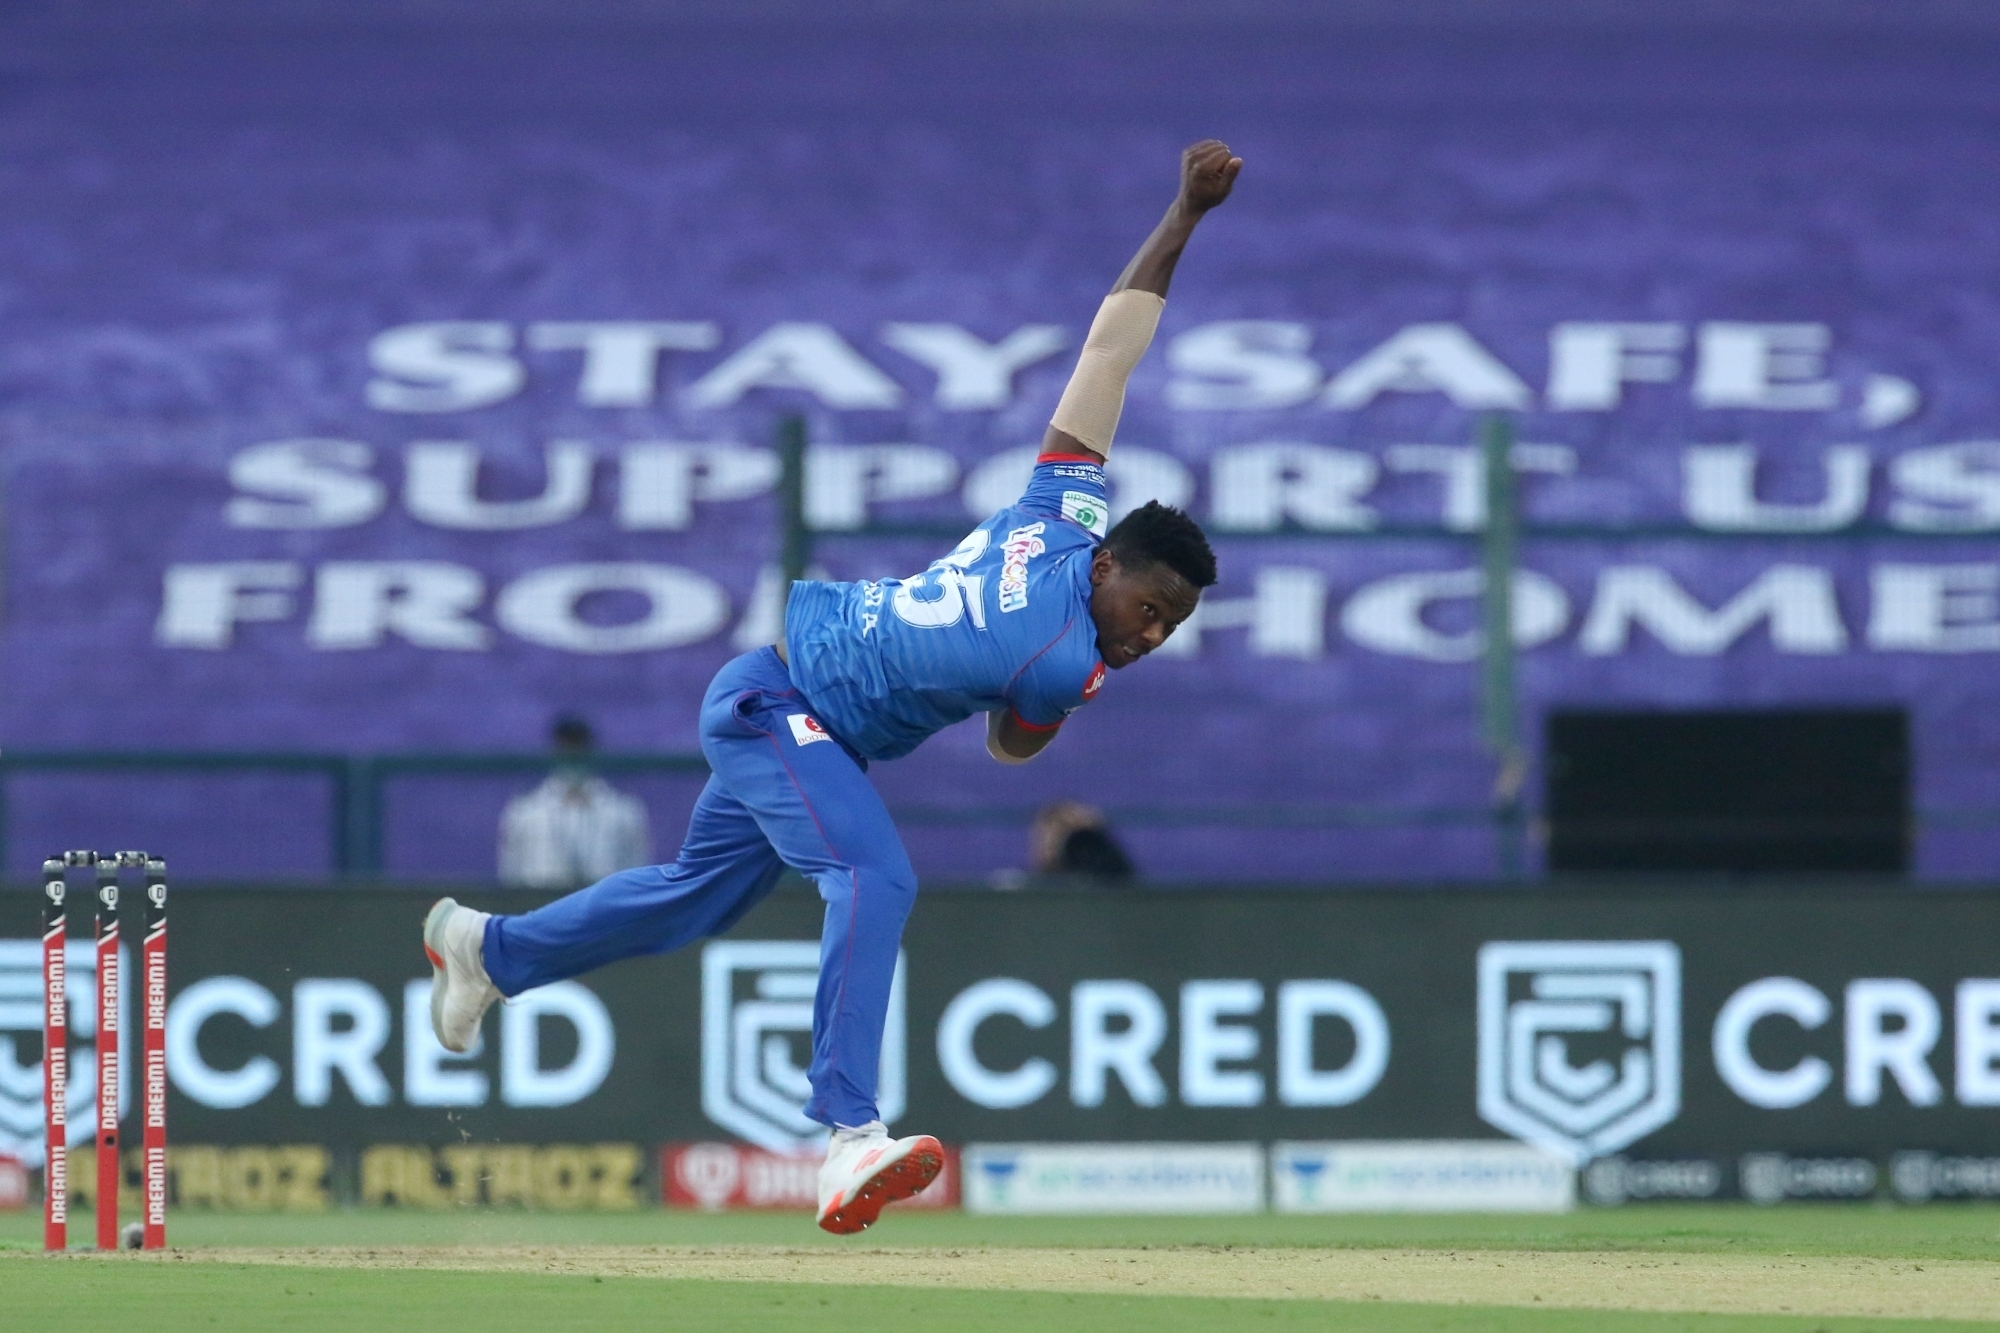 Rabada has been by far the best bowler in IPL 2020 | BCCI/IPL